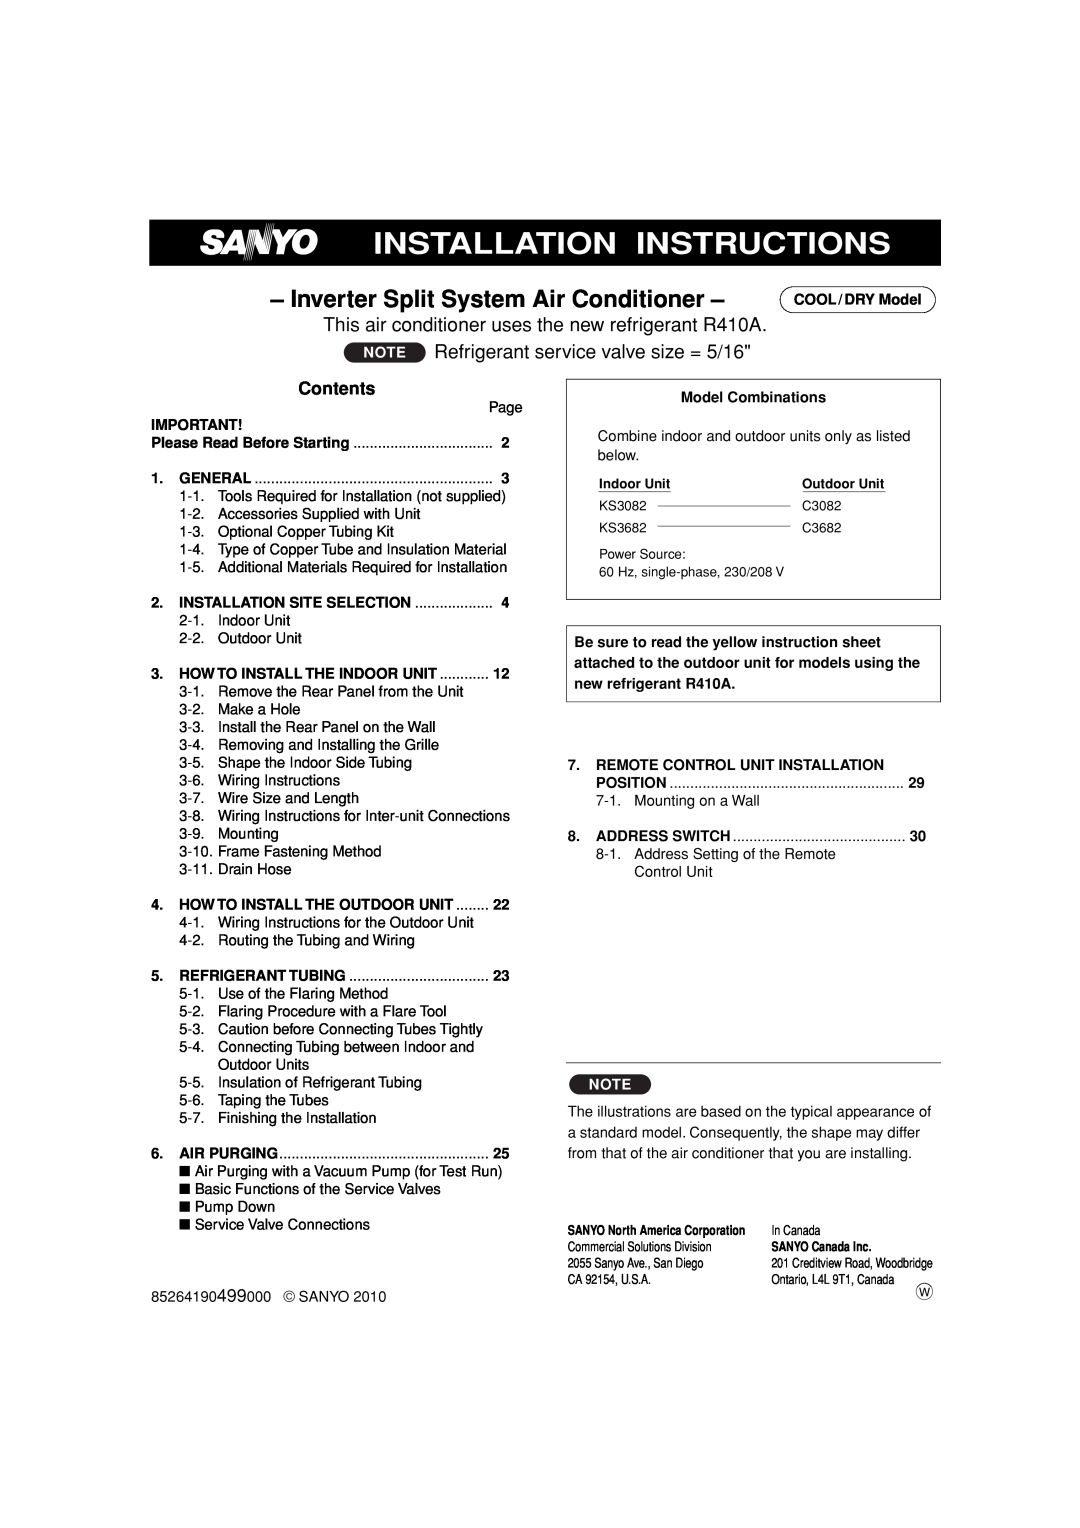 Sanyo C3682 Installation Instructions, Inverter Split System Air Conditioner, Contents, COOL/DRY Model, Model Combinations 